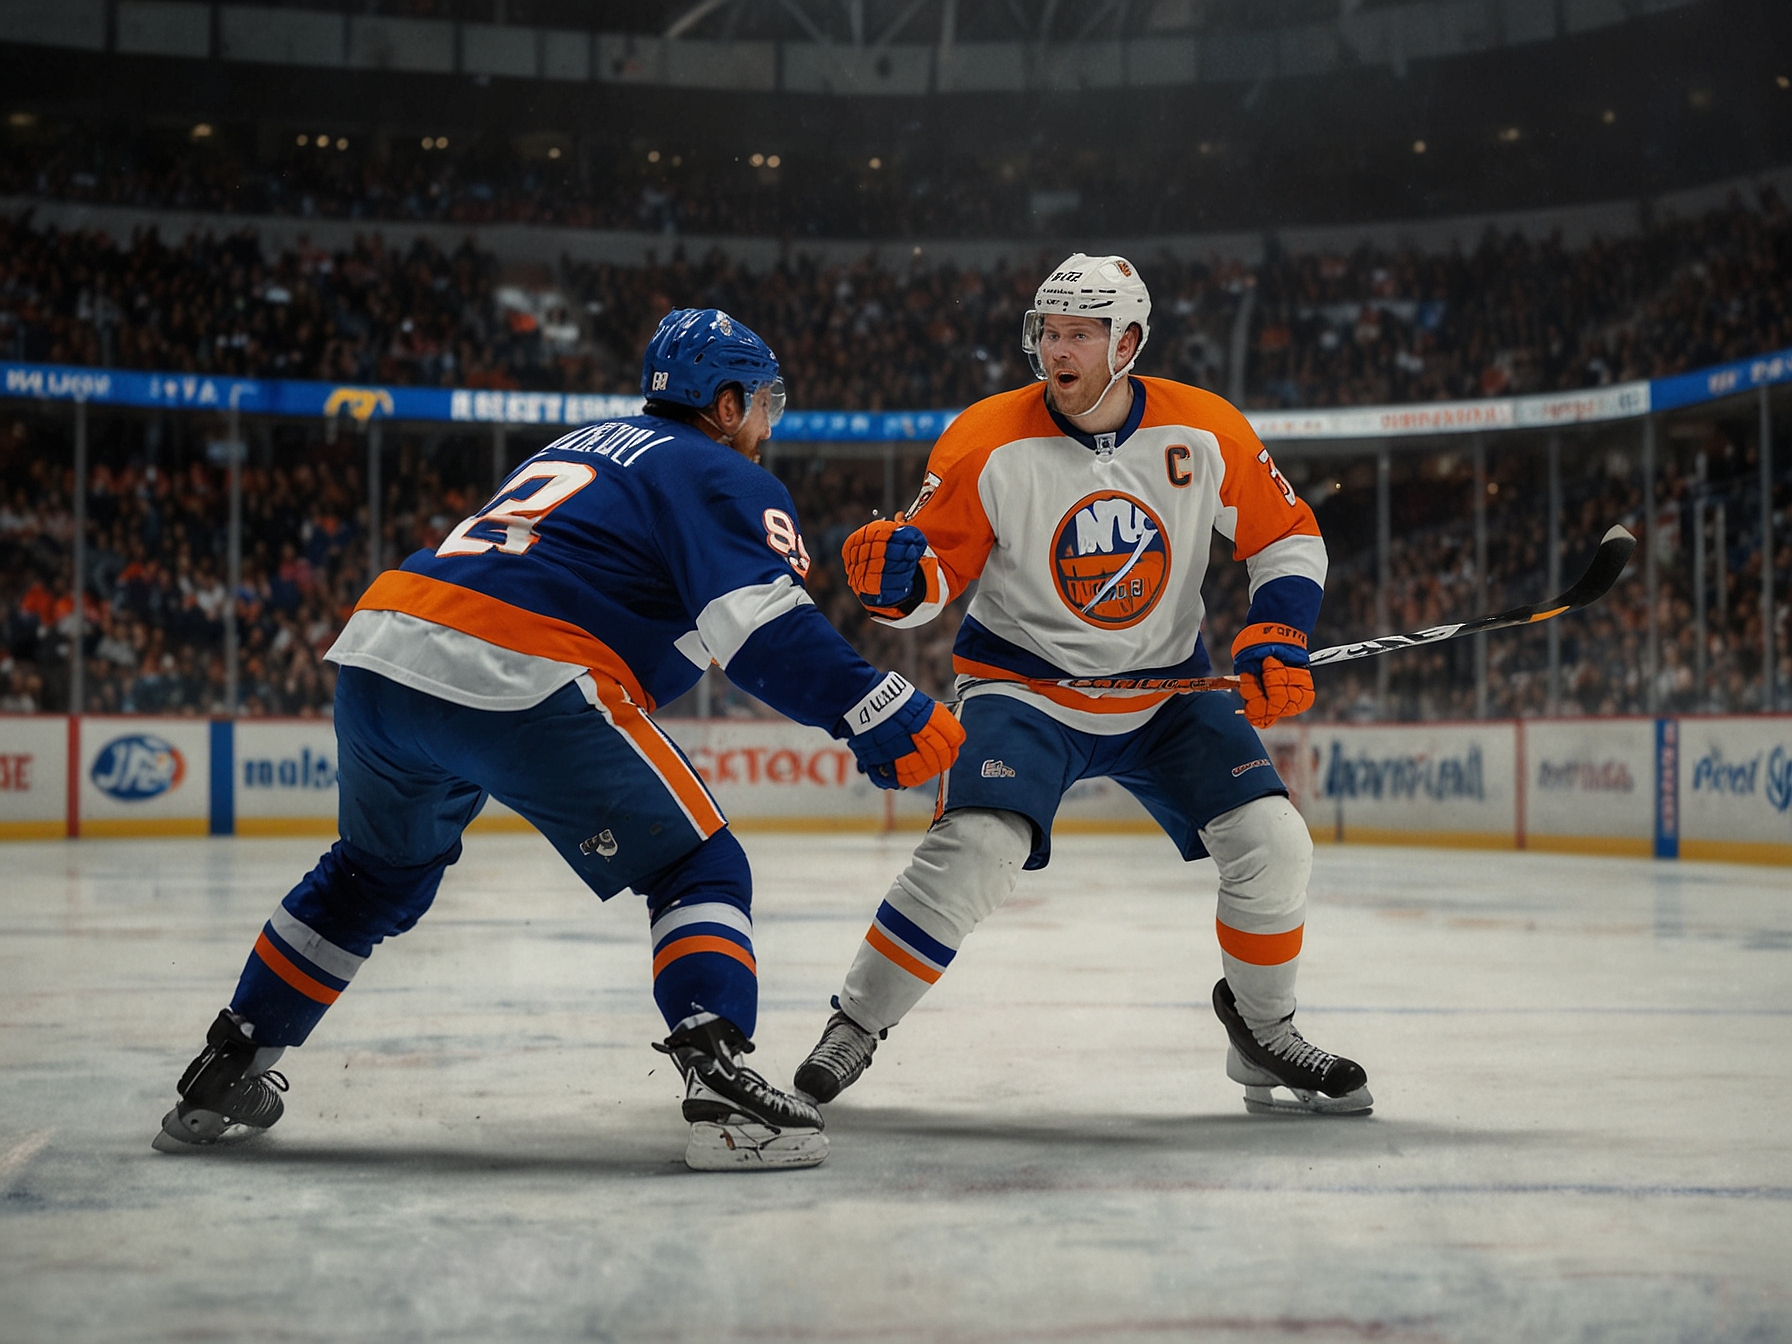 Mike Reilly, wearing his Islanders gear, defends against an opposing player near the blue line. This scene illustrates Reilly’s defensive prowess and his significance to the Islanders' defense.